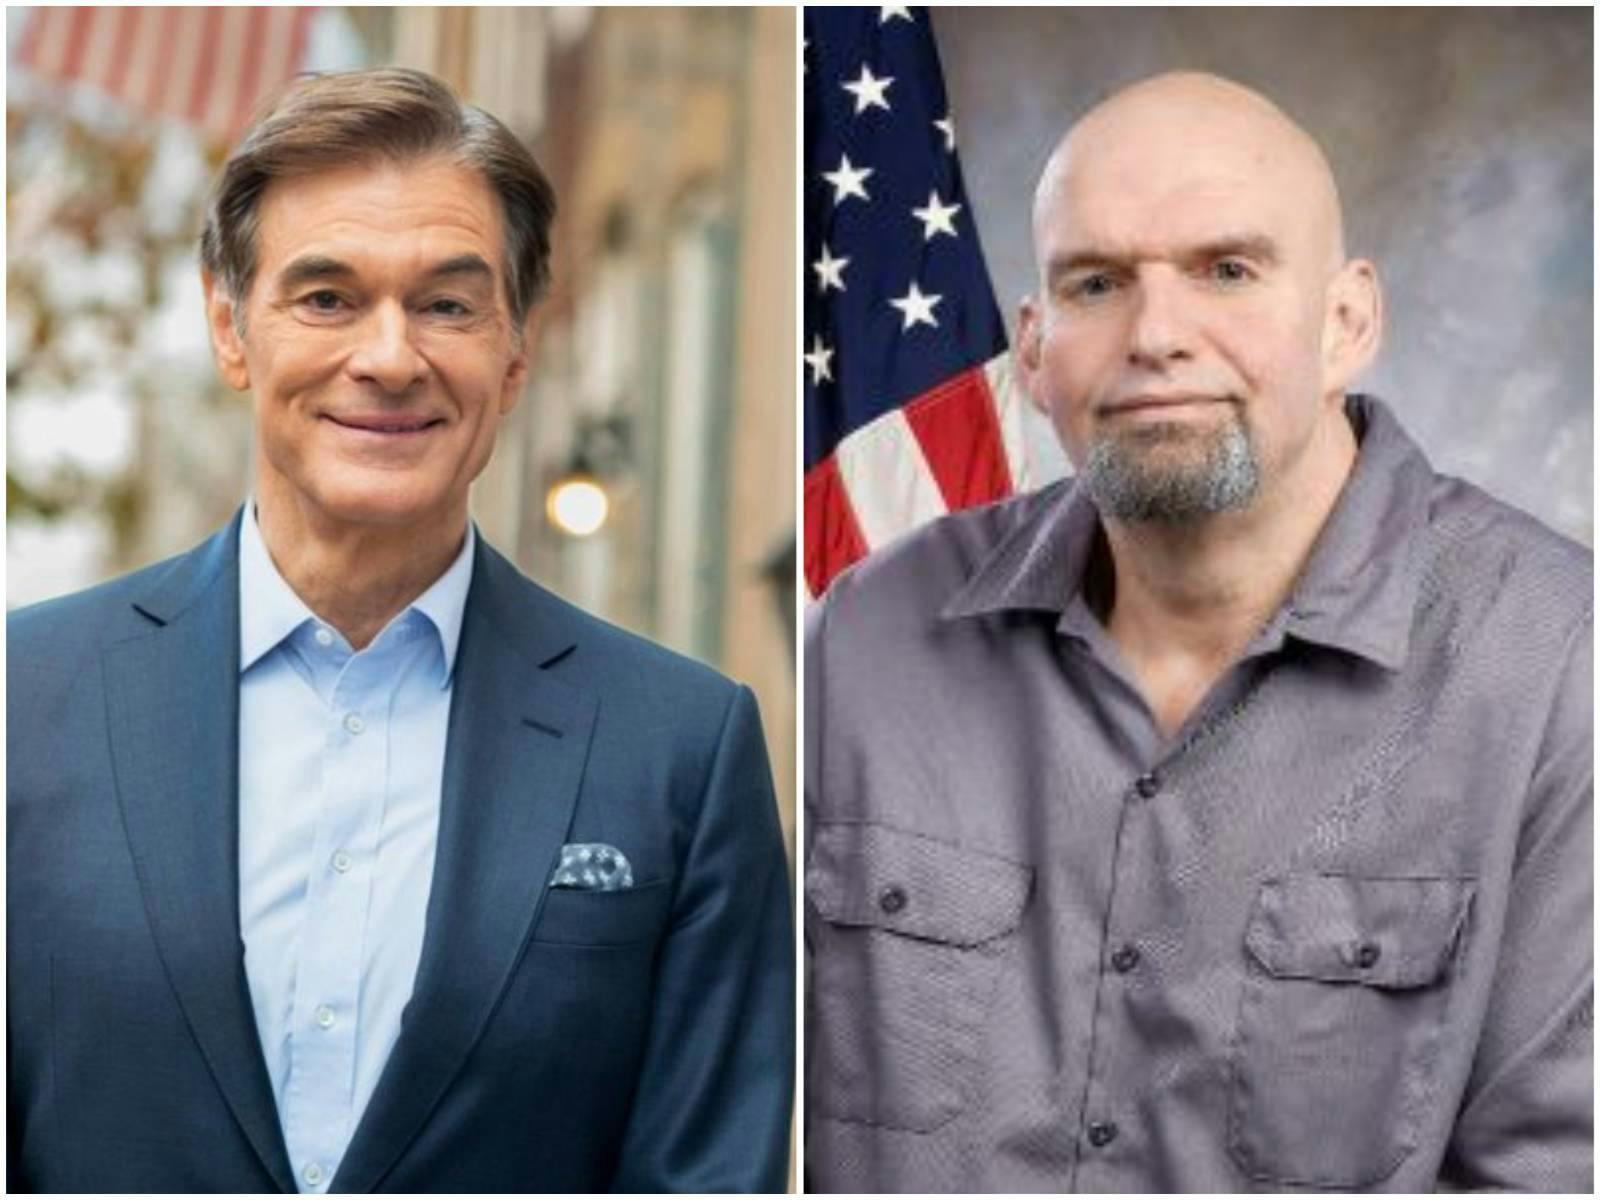 Mehmet Oz, John Fetterman running neck and neck in race that could decide control of Senate 